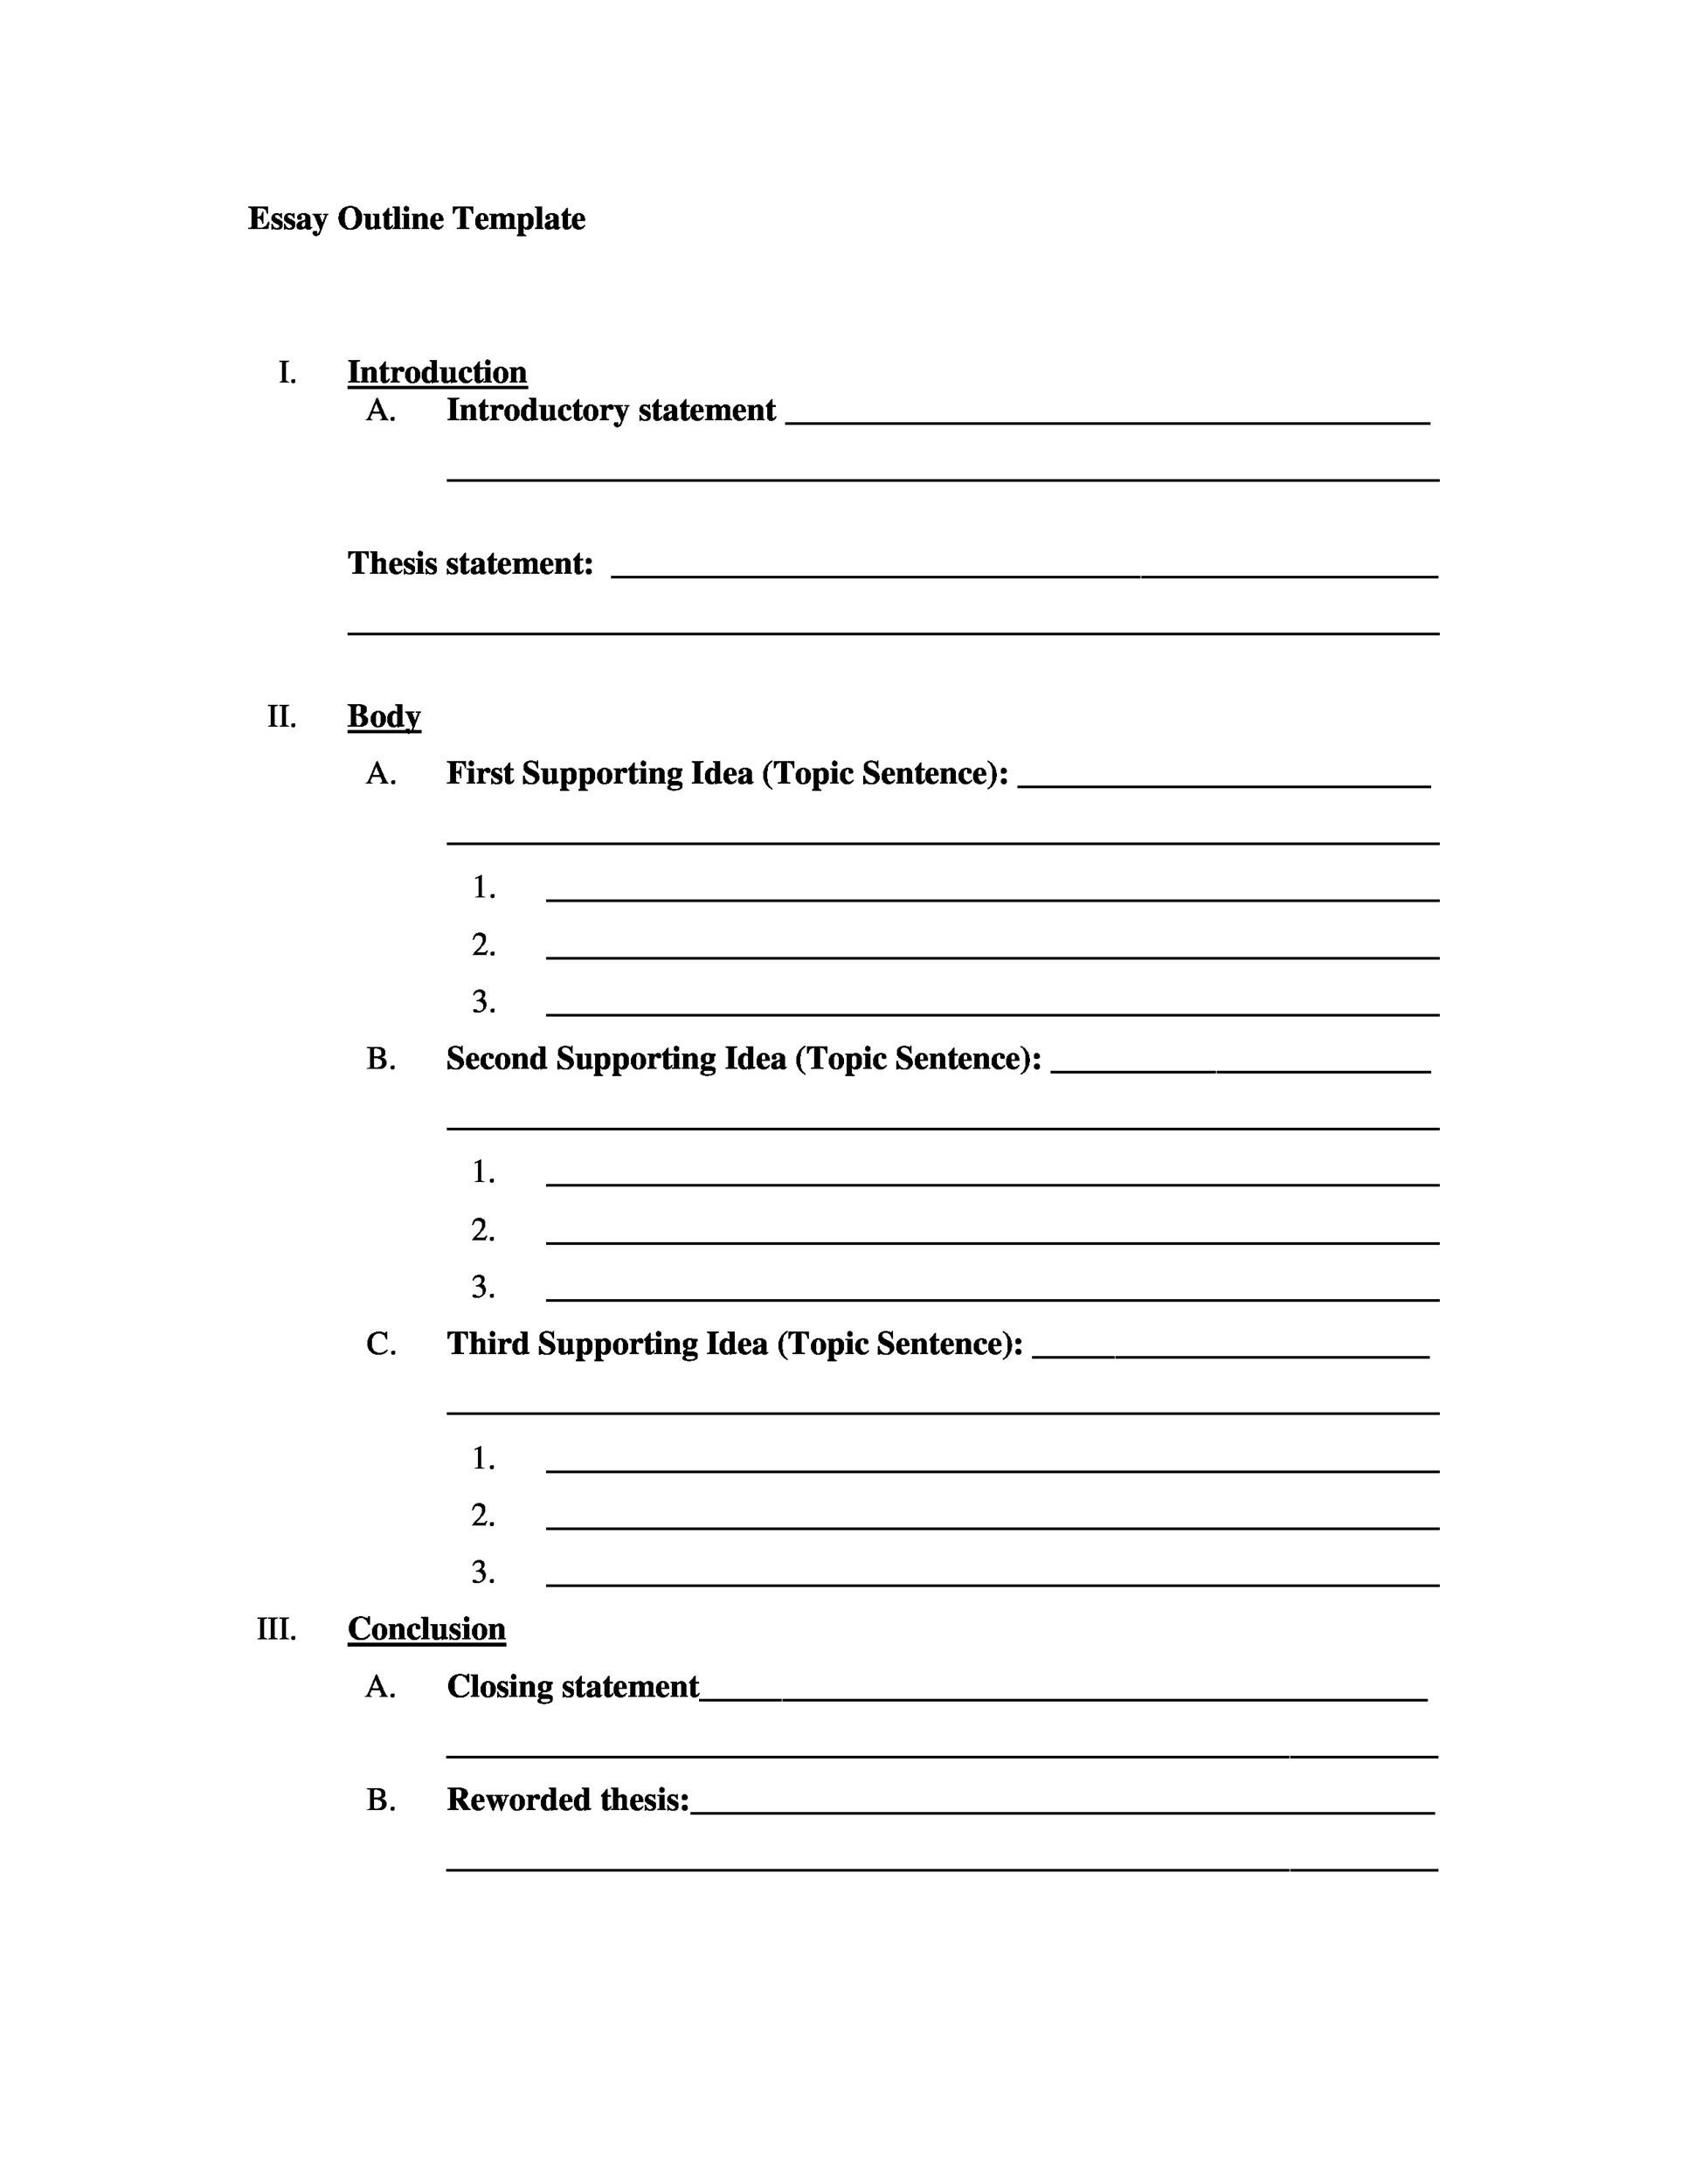 template of business research requests and proposals free download